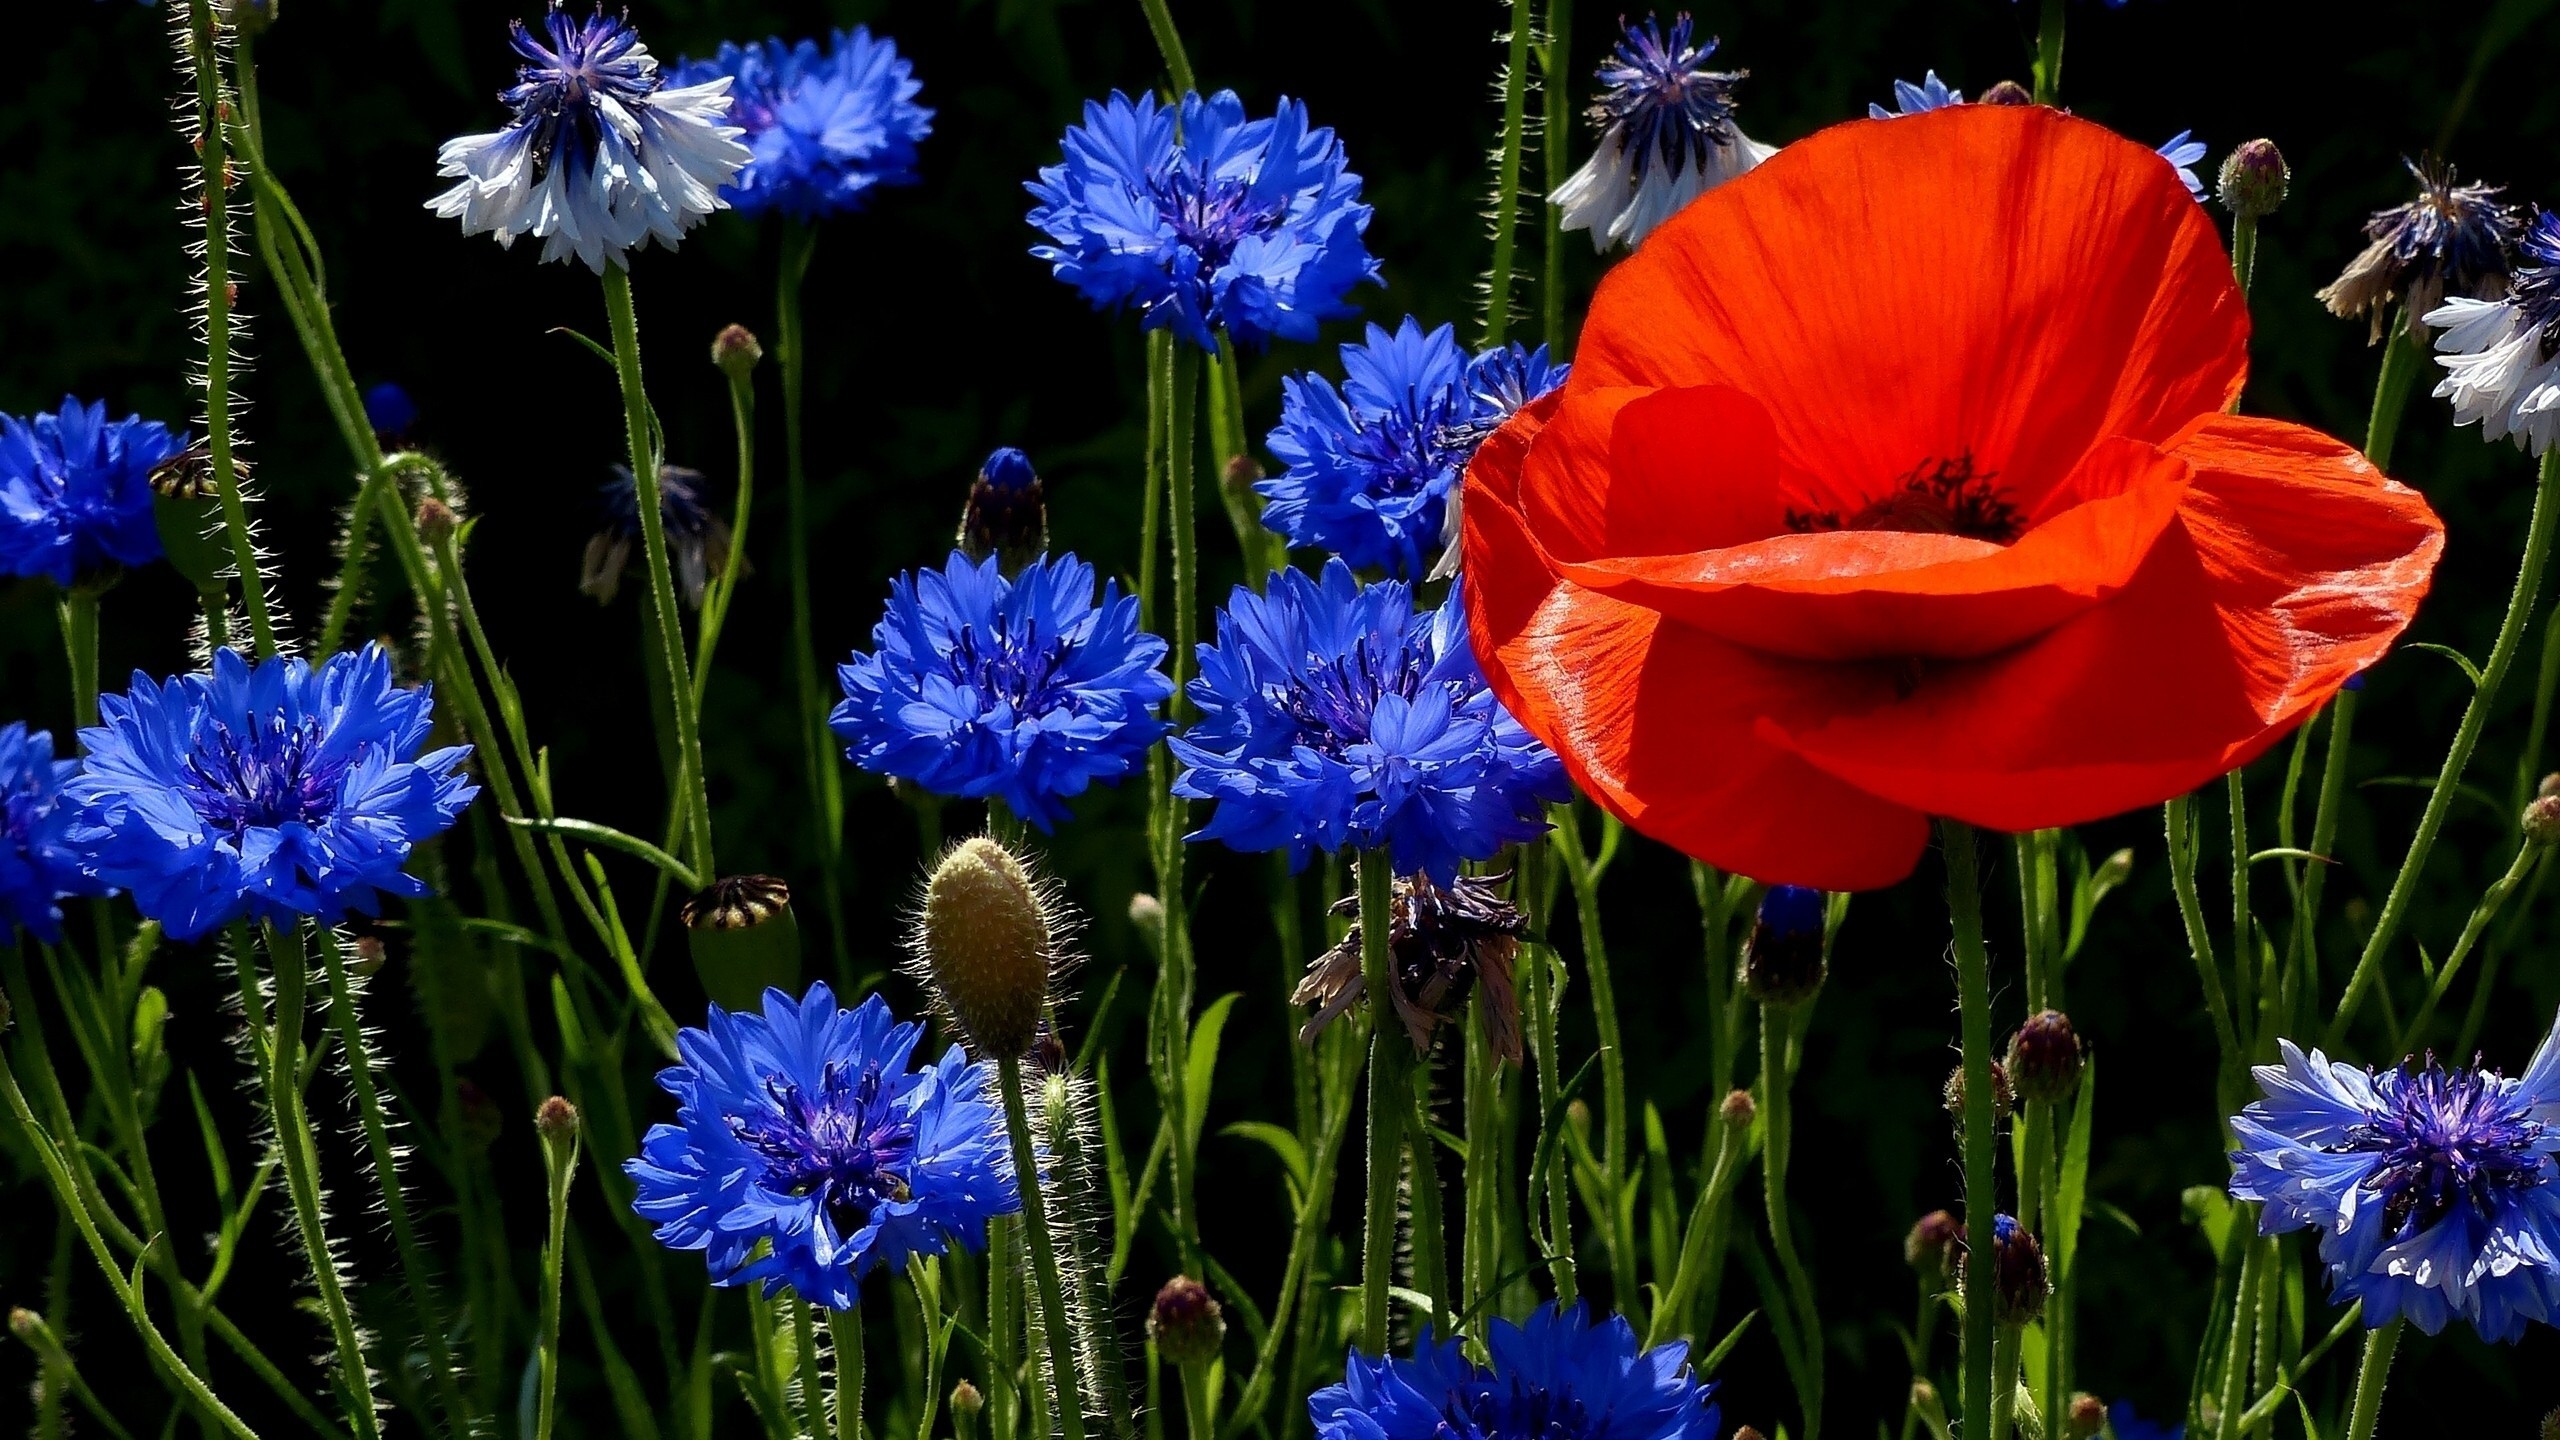 Poppies and Cornflowers for 2560x1440 HDTV resolution